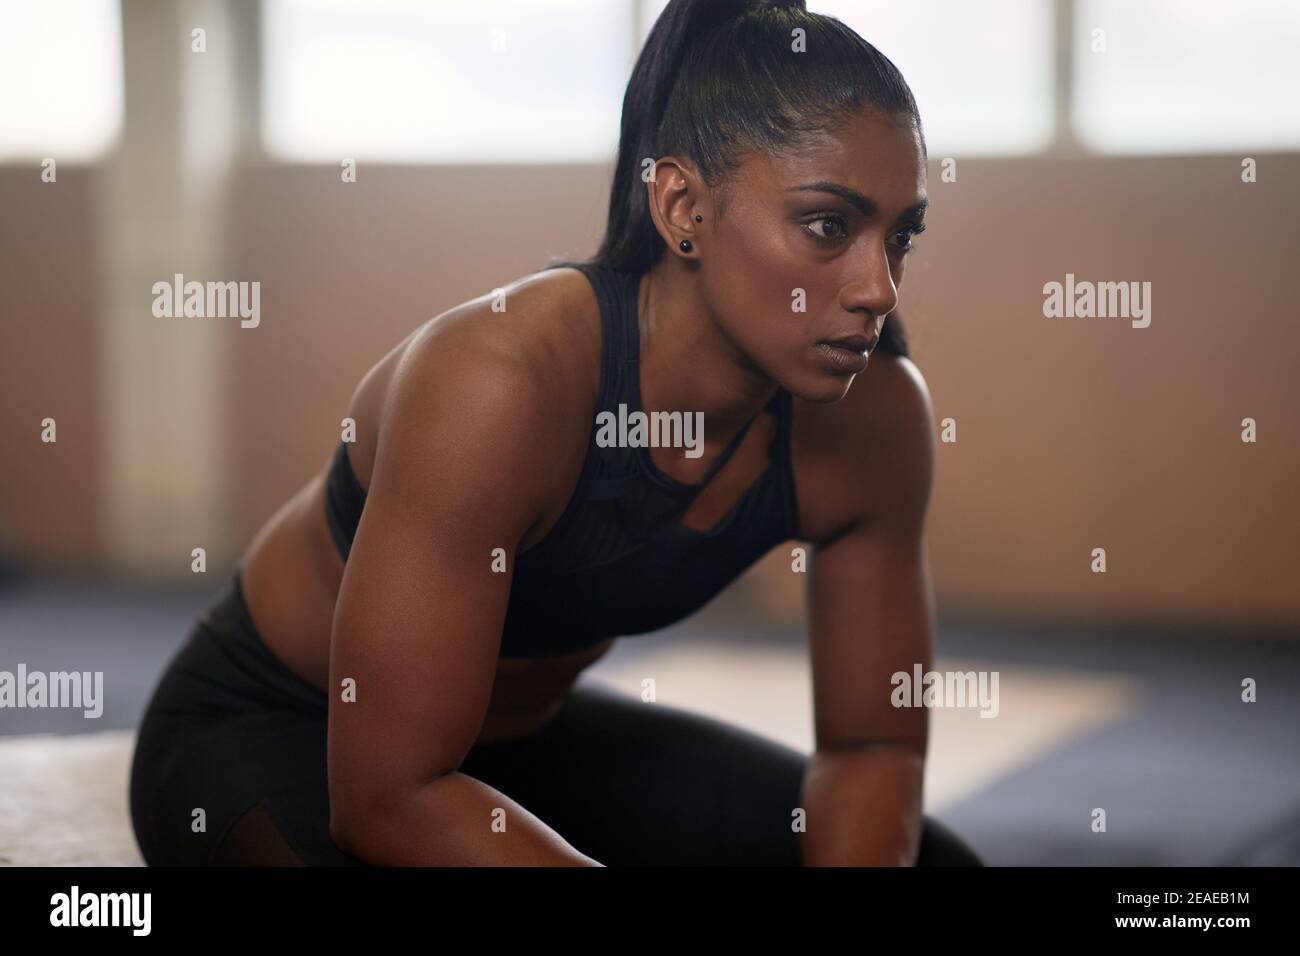 Muscular young Indian woman in sportswear taking a break after workout session in a gym Stock Photo